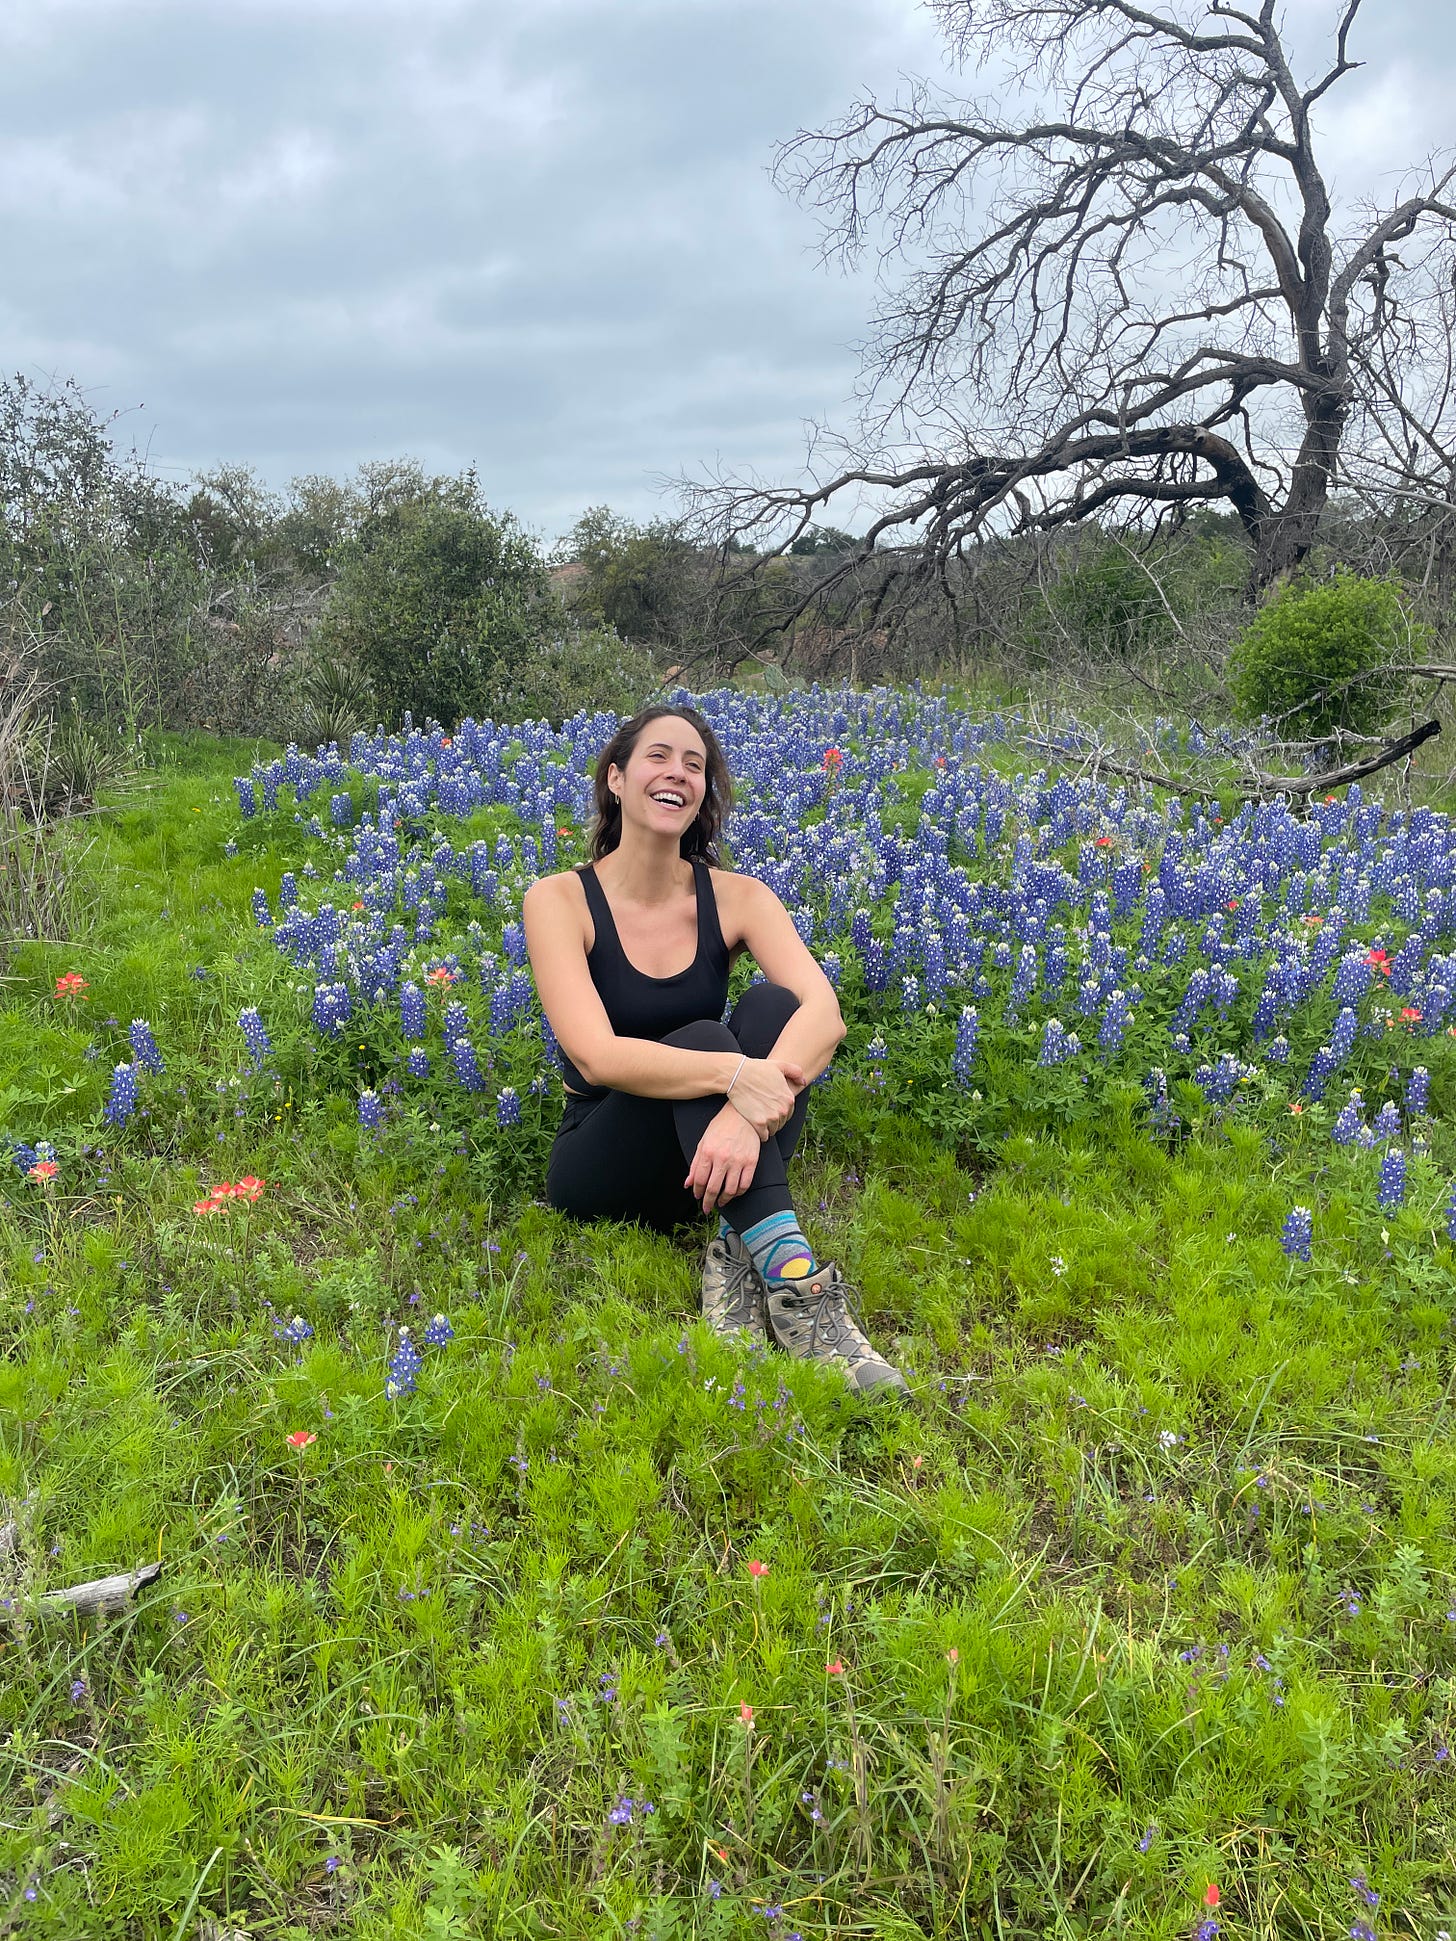 A white woman with brown hair in black athletic clothing and hiking boots sits in front of a patch of blooming bluebonnets, smiling.